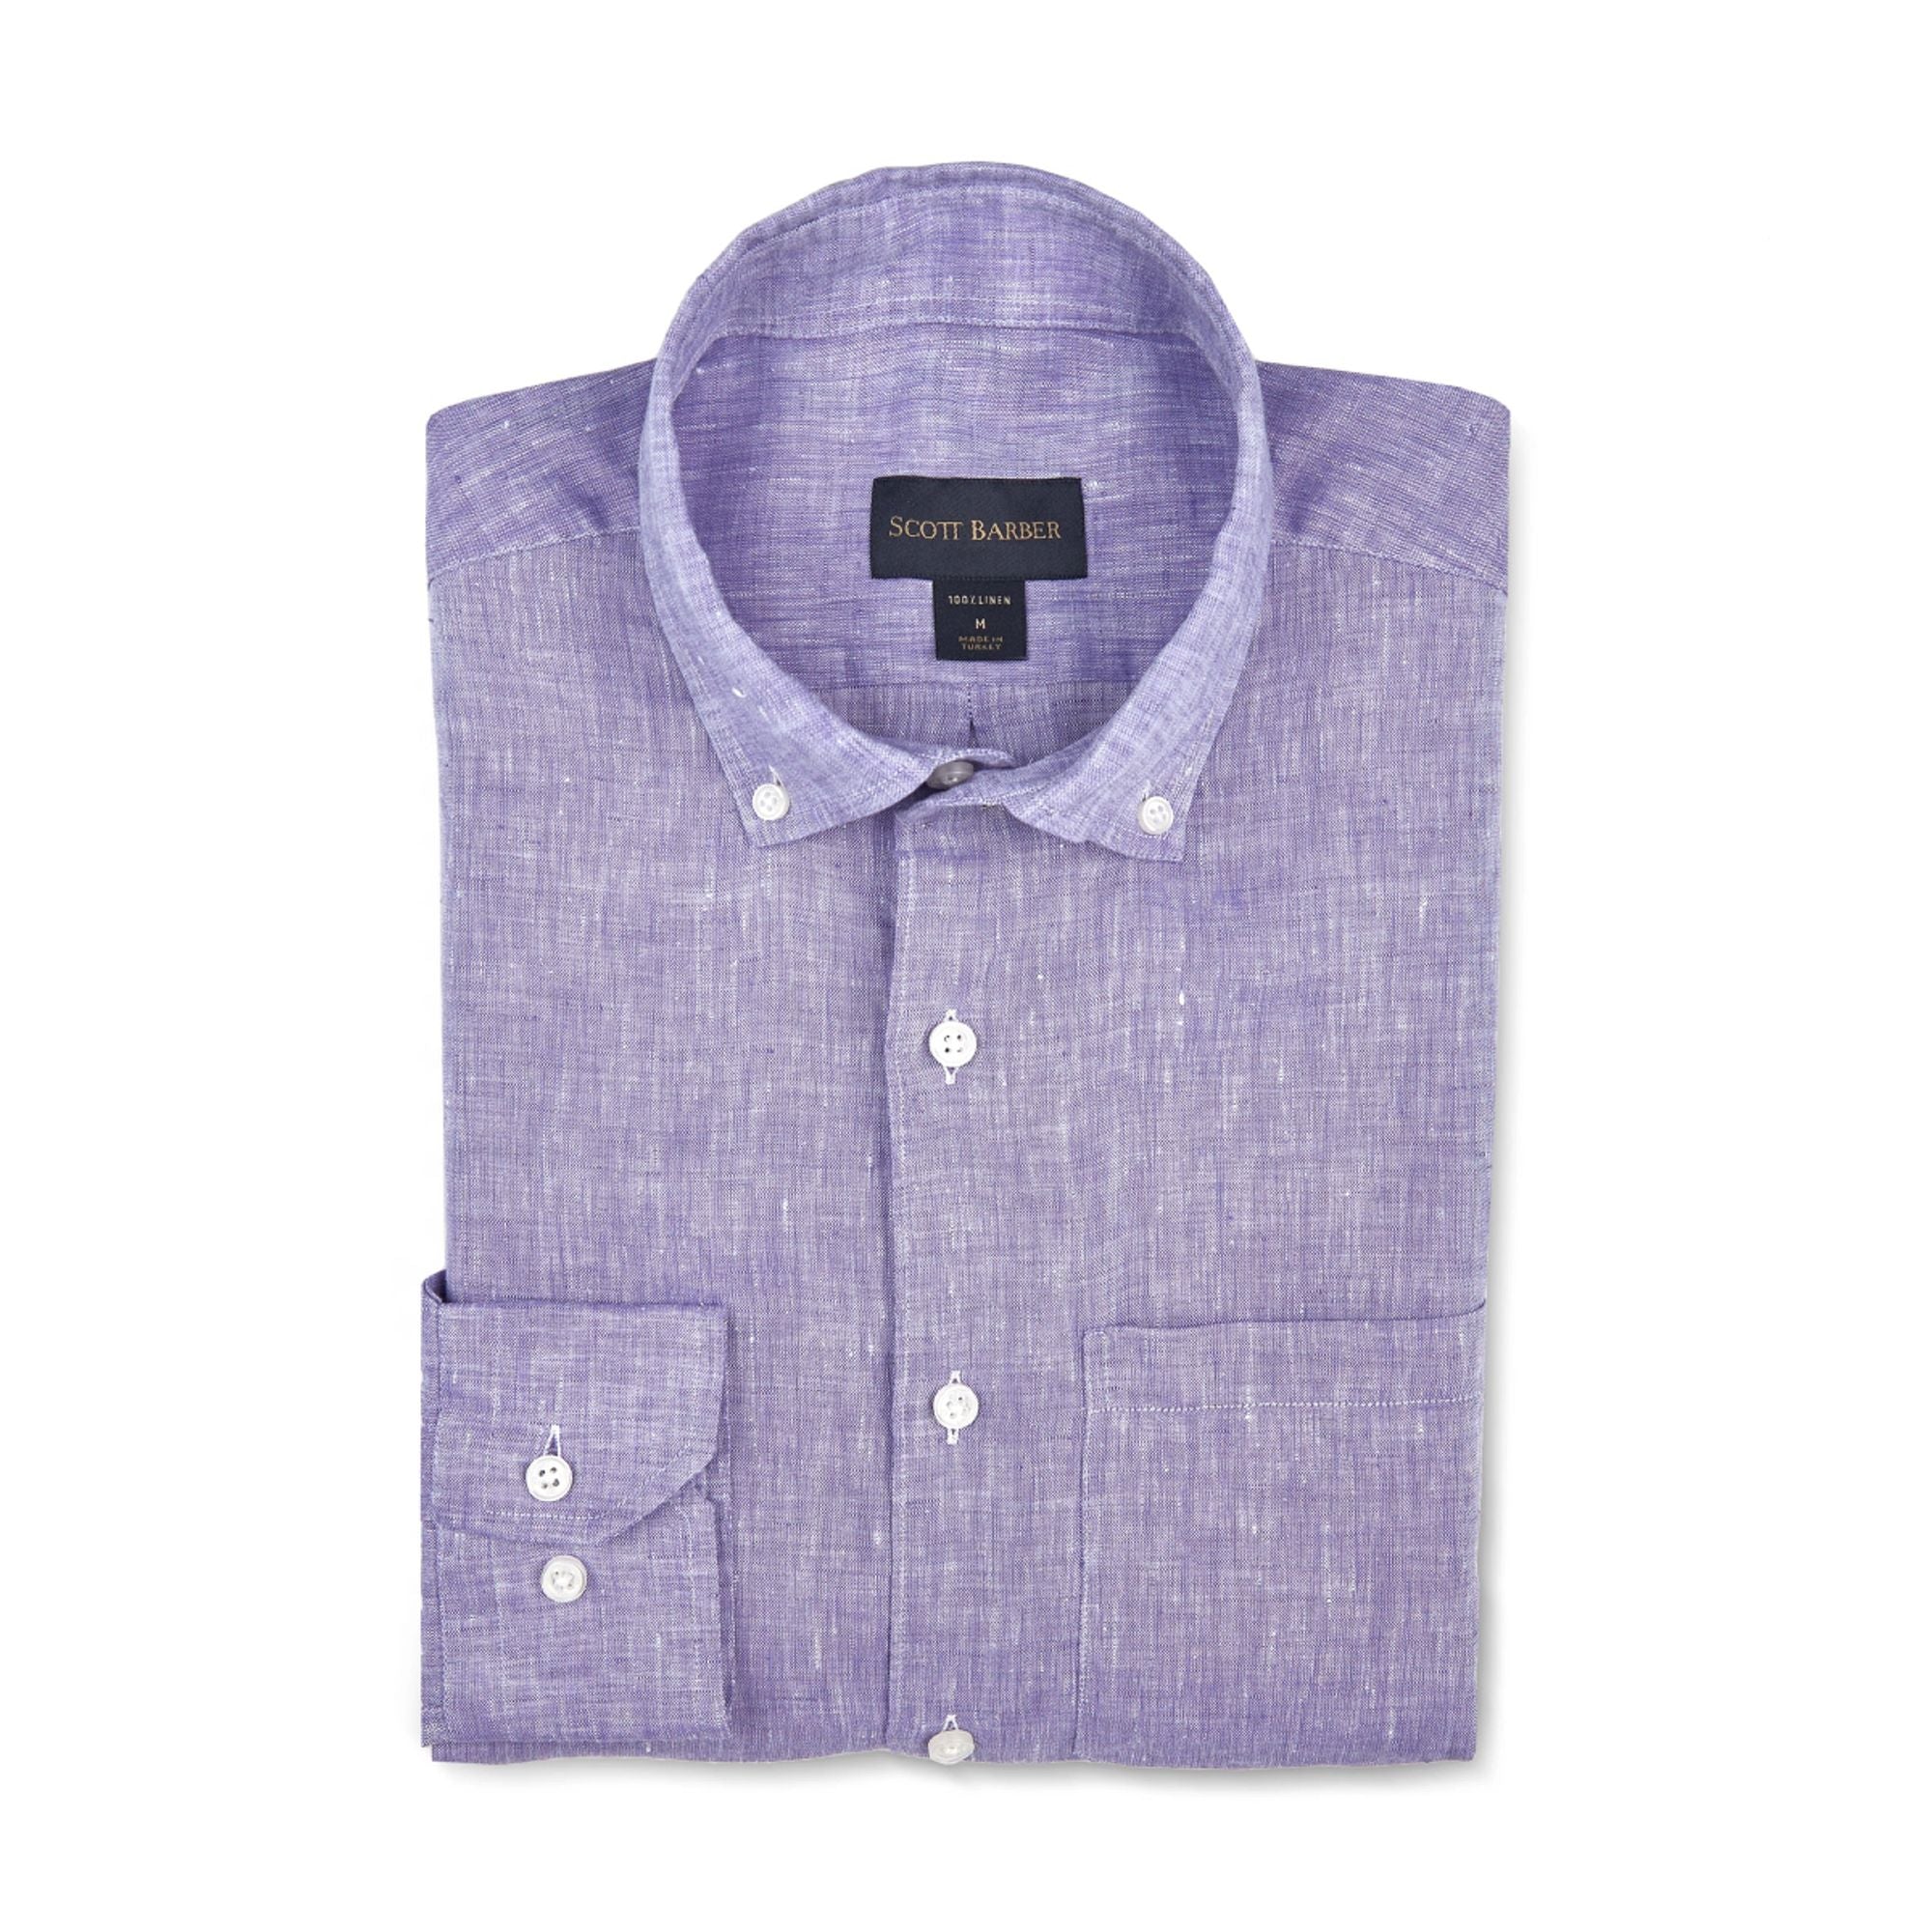 Solid Linen Long Sleeve Shirt with Button Down Collar in Lilac by Scott Barber